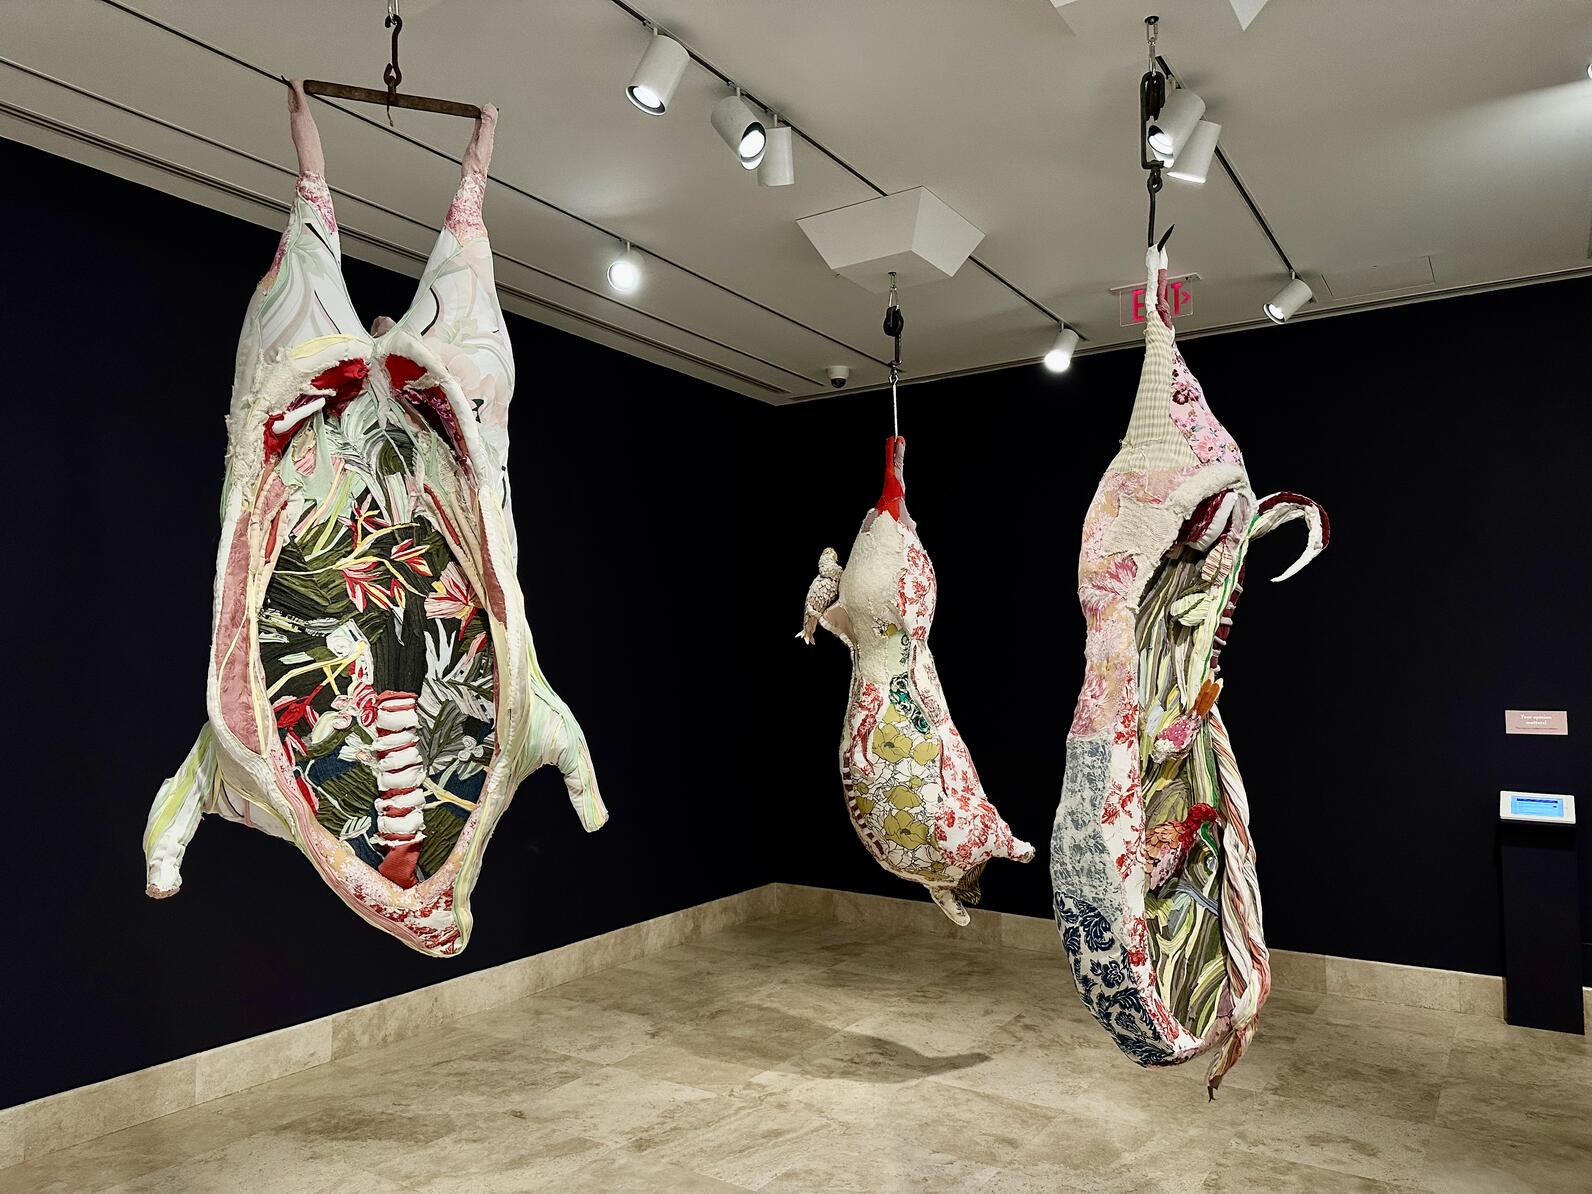 Three fiber art works that resemble hanging cattle carcasses in pastel colors.